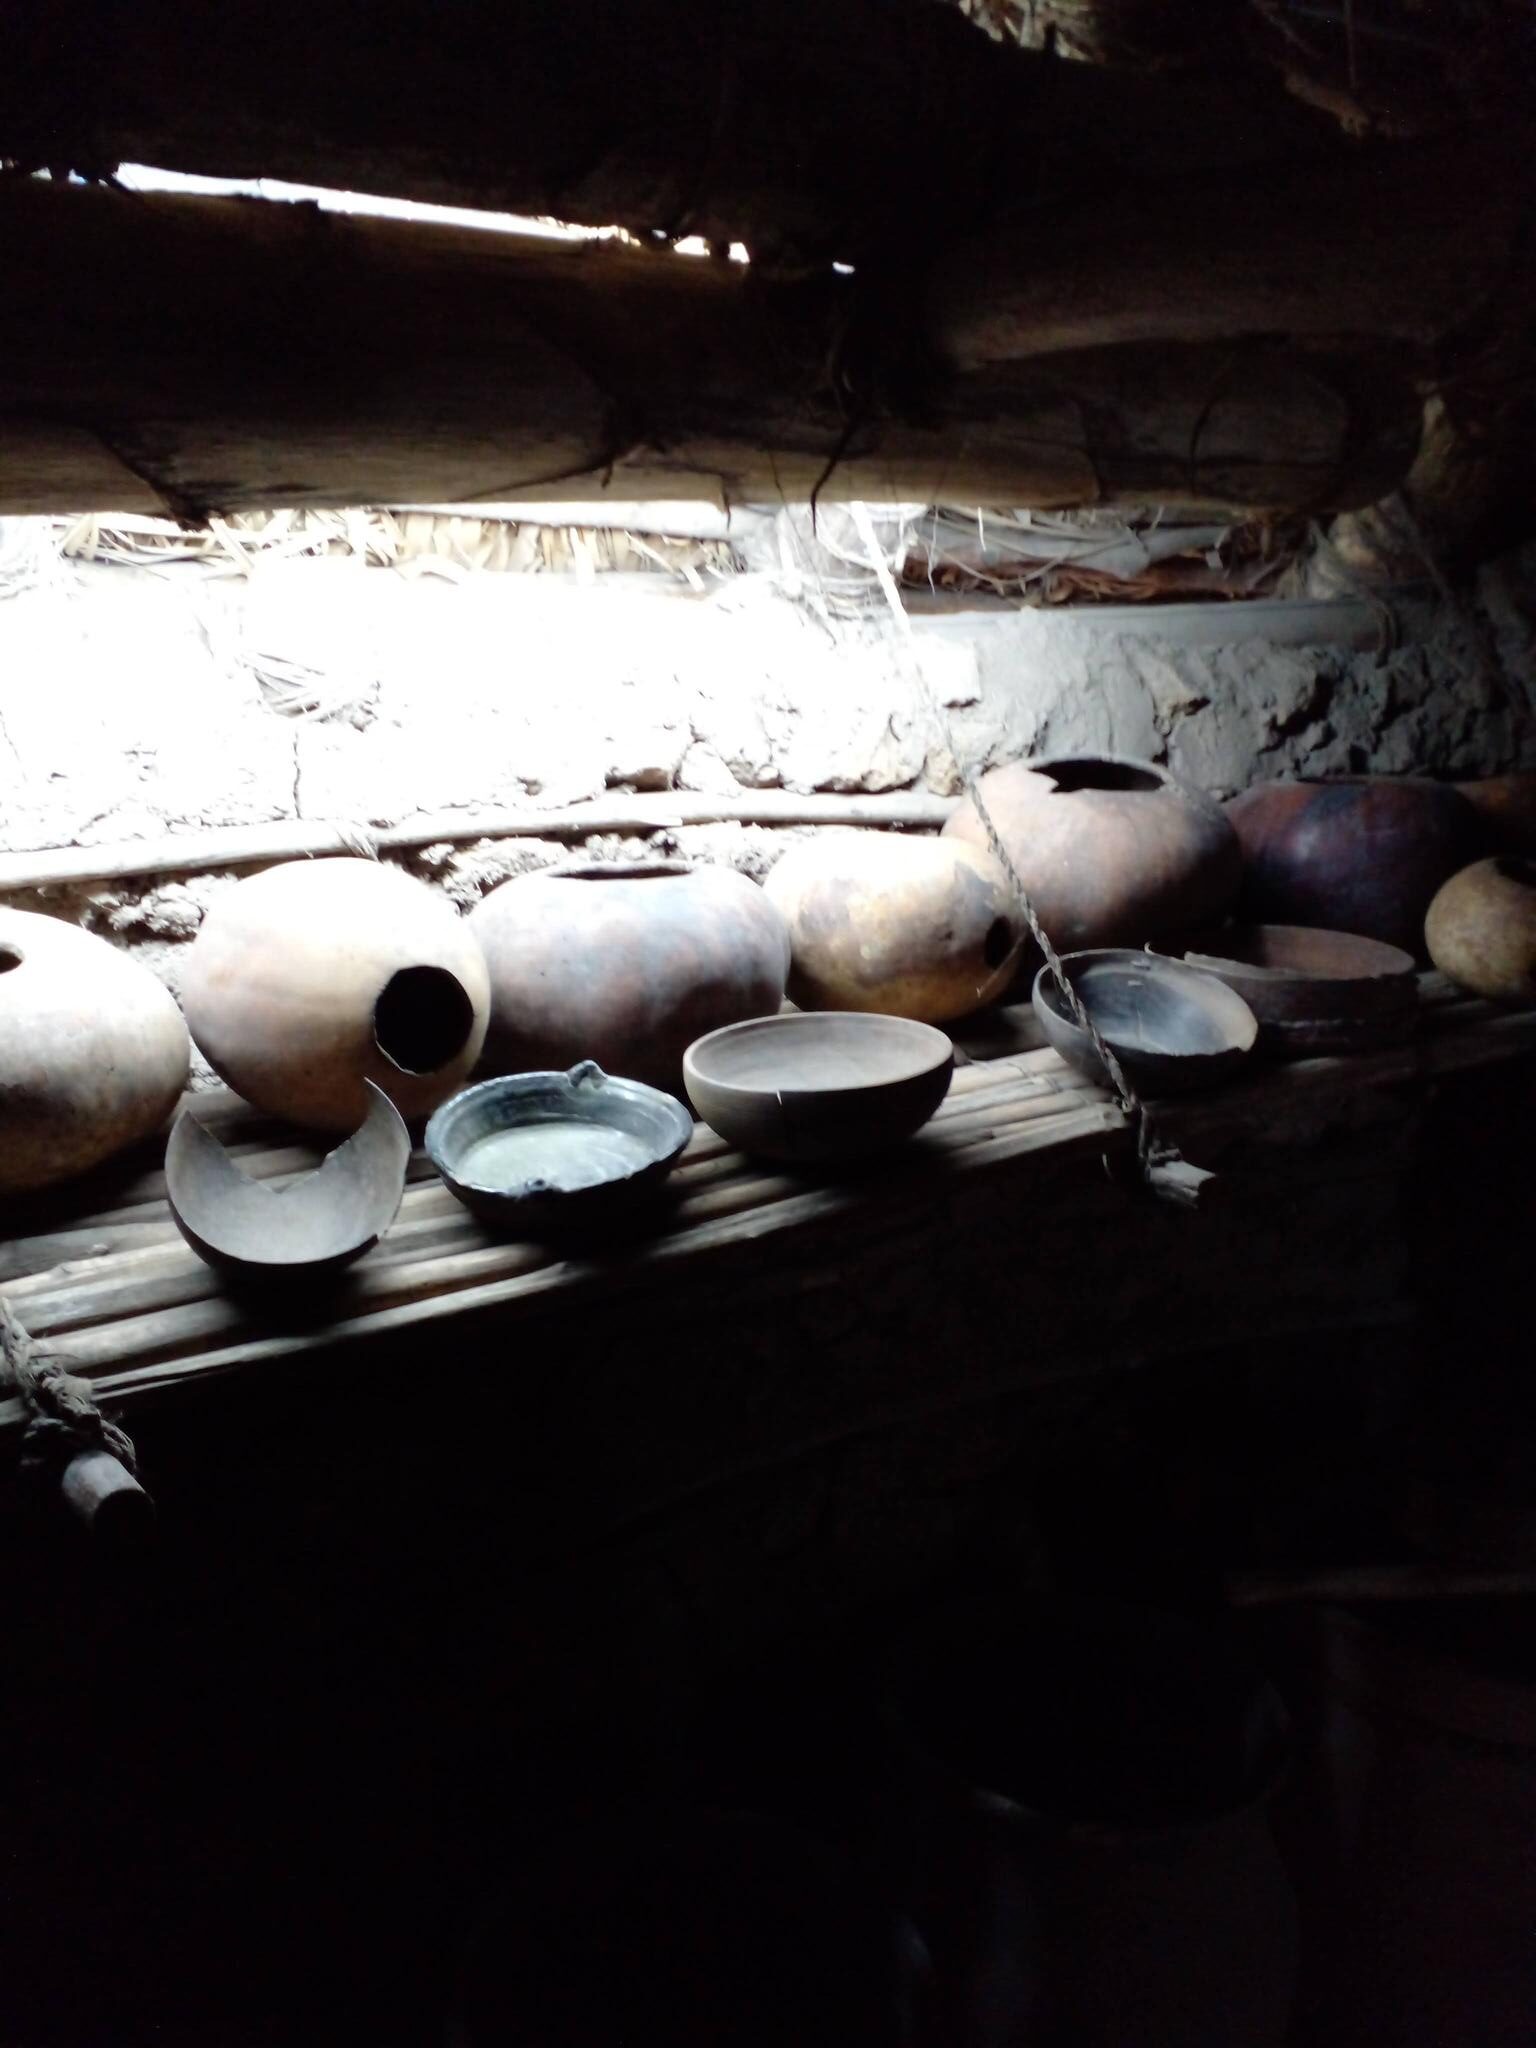 Impressions of an authentic indigenous house or choza of the Andean highlands.